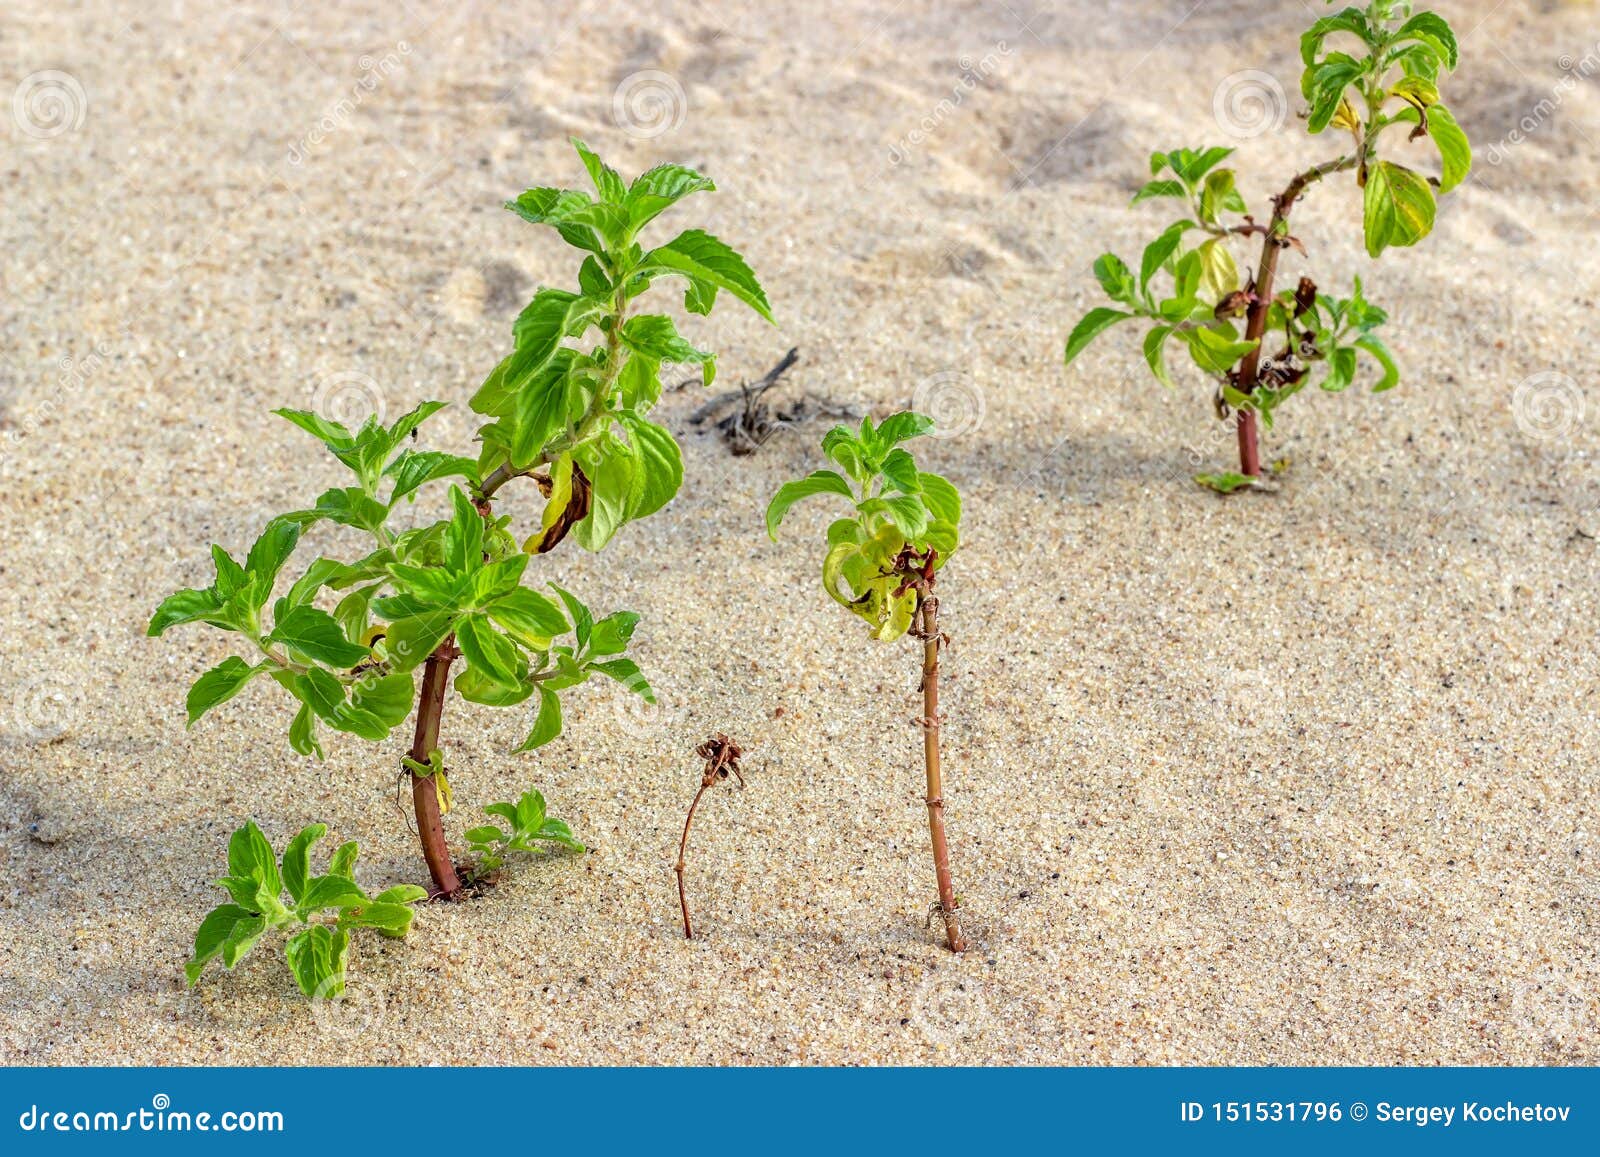 Green Young Plants Grow in the Sand Stock Photo - Image of life